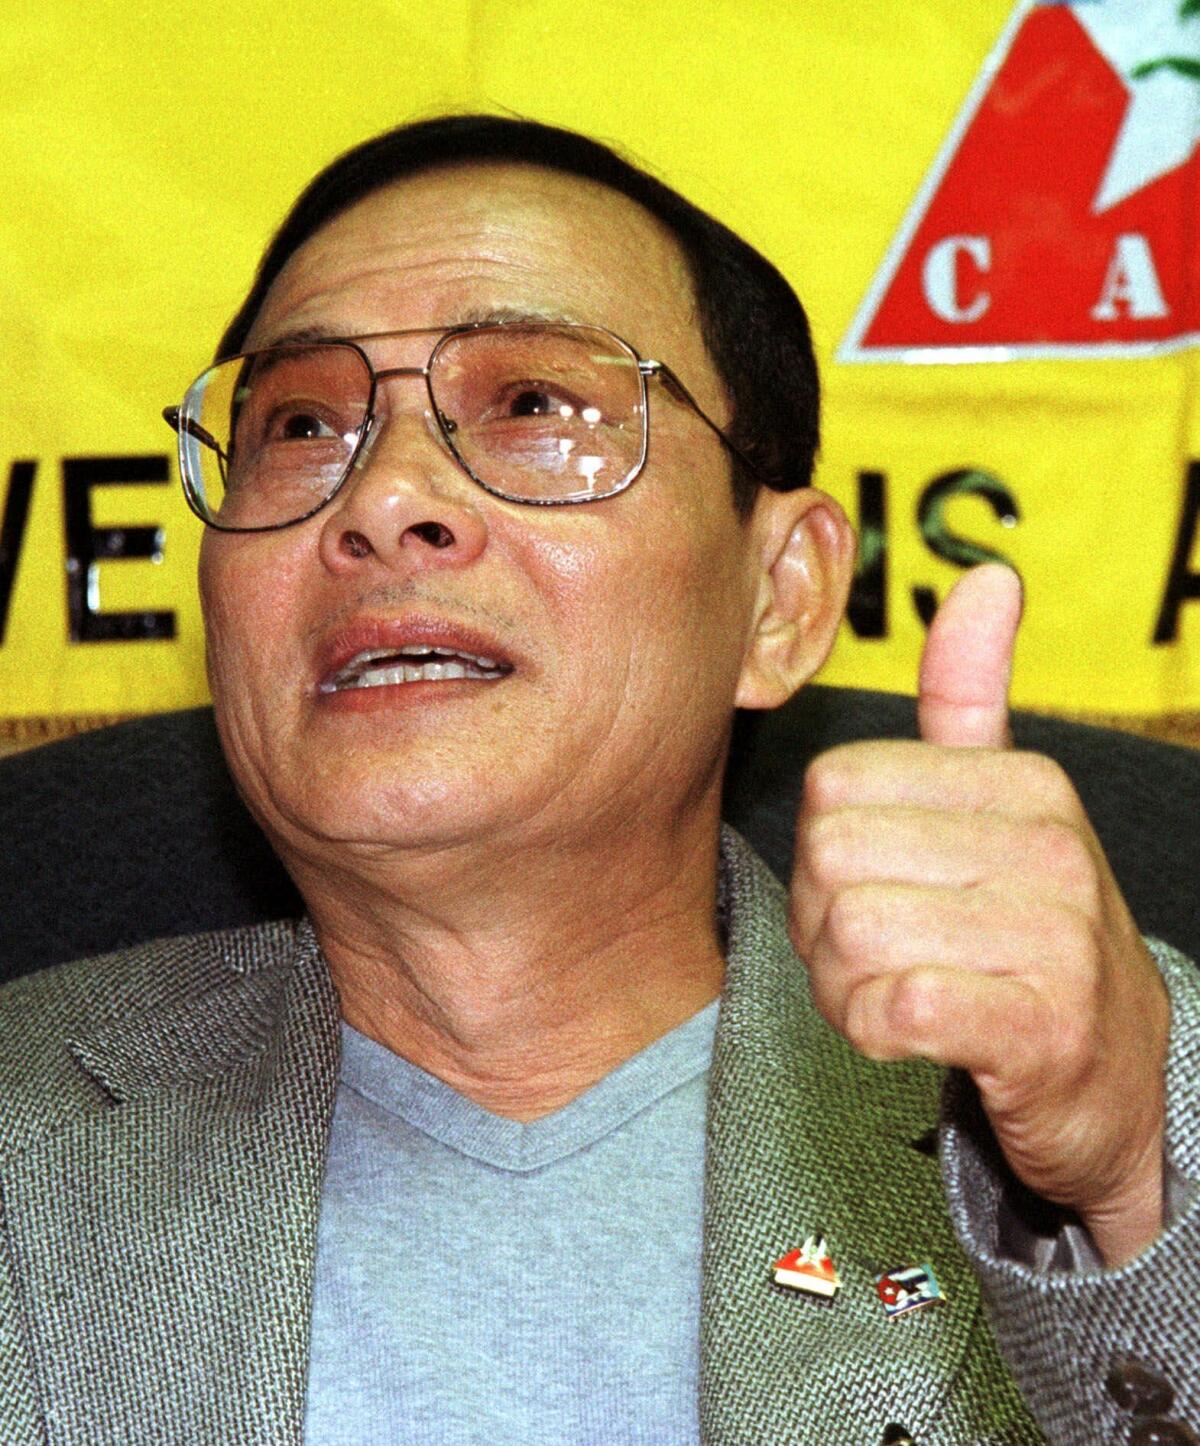 Pilot Ly Tong gestures as he responds to a reporter after receiving medals from the Brothers to the Rescue and the Cuban American Veterans Assn. in Miami in 2000.